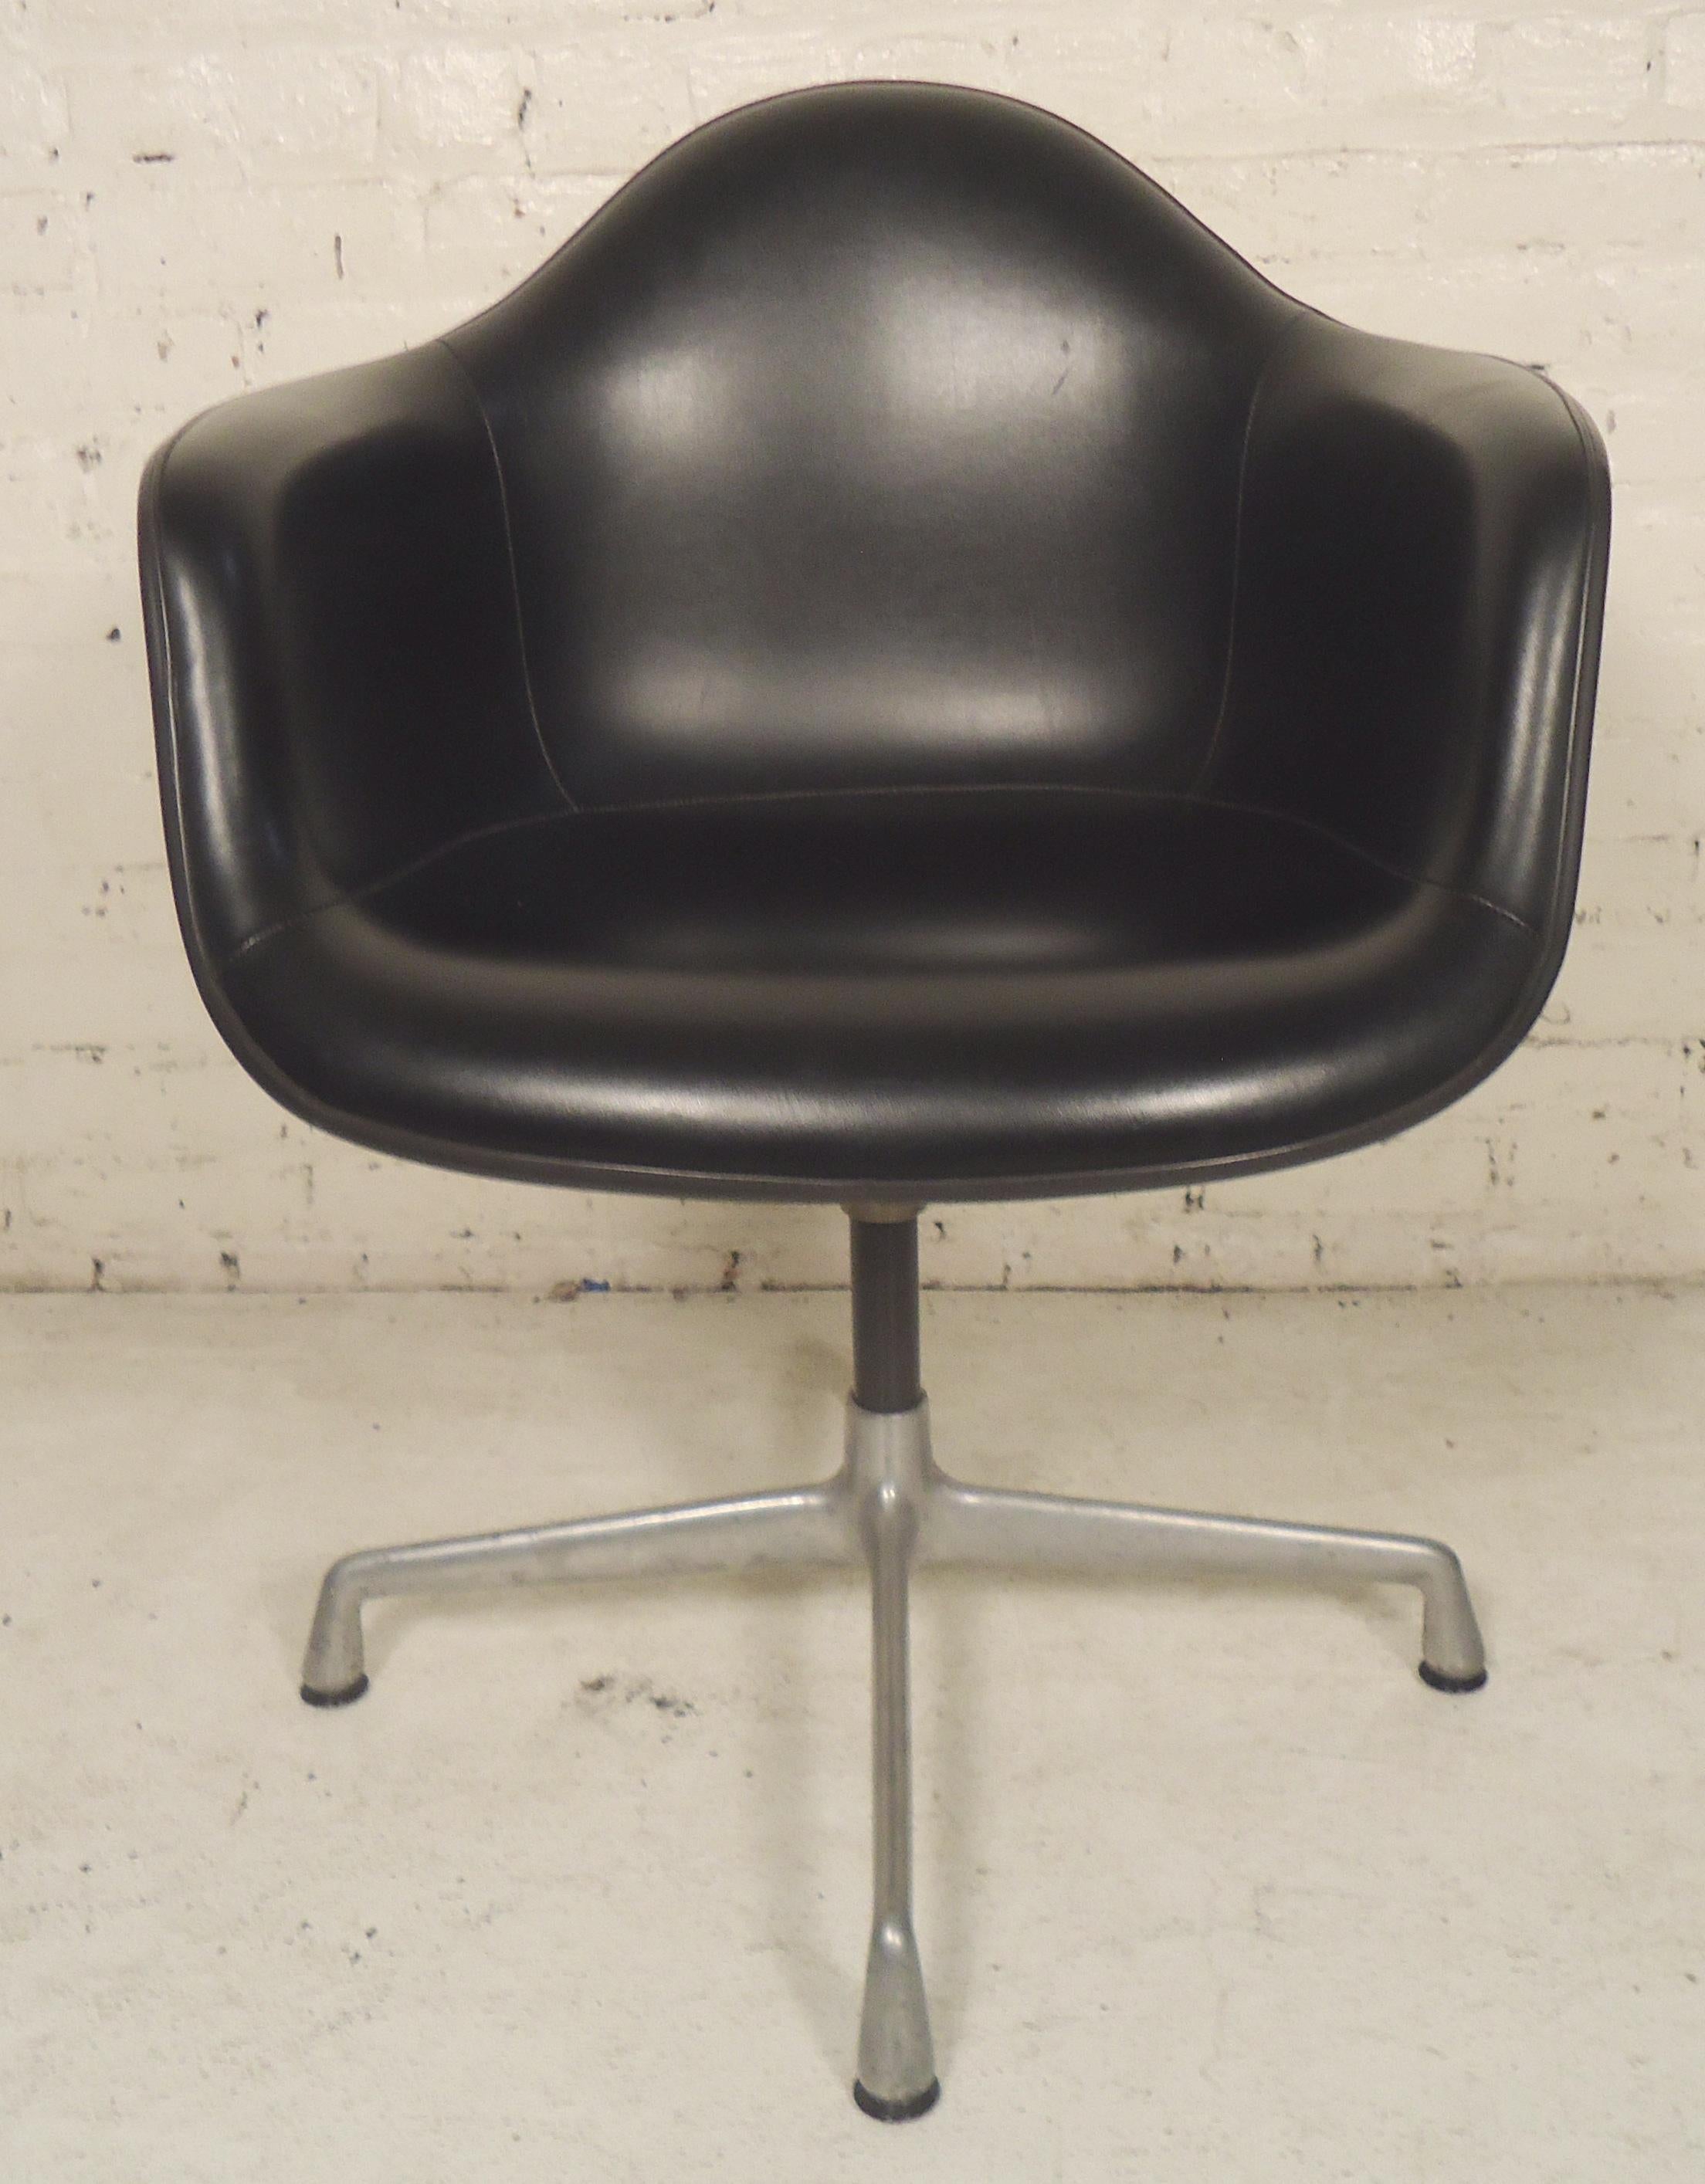 Classic Mid-Century Modern office chair on swivel base in black leather. Molded fiberglass seat with arms on aluminum base.

(Please confirm item location - NY or NJ - with dealer).
    